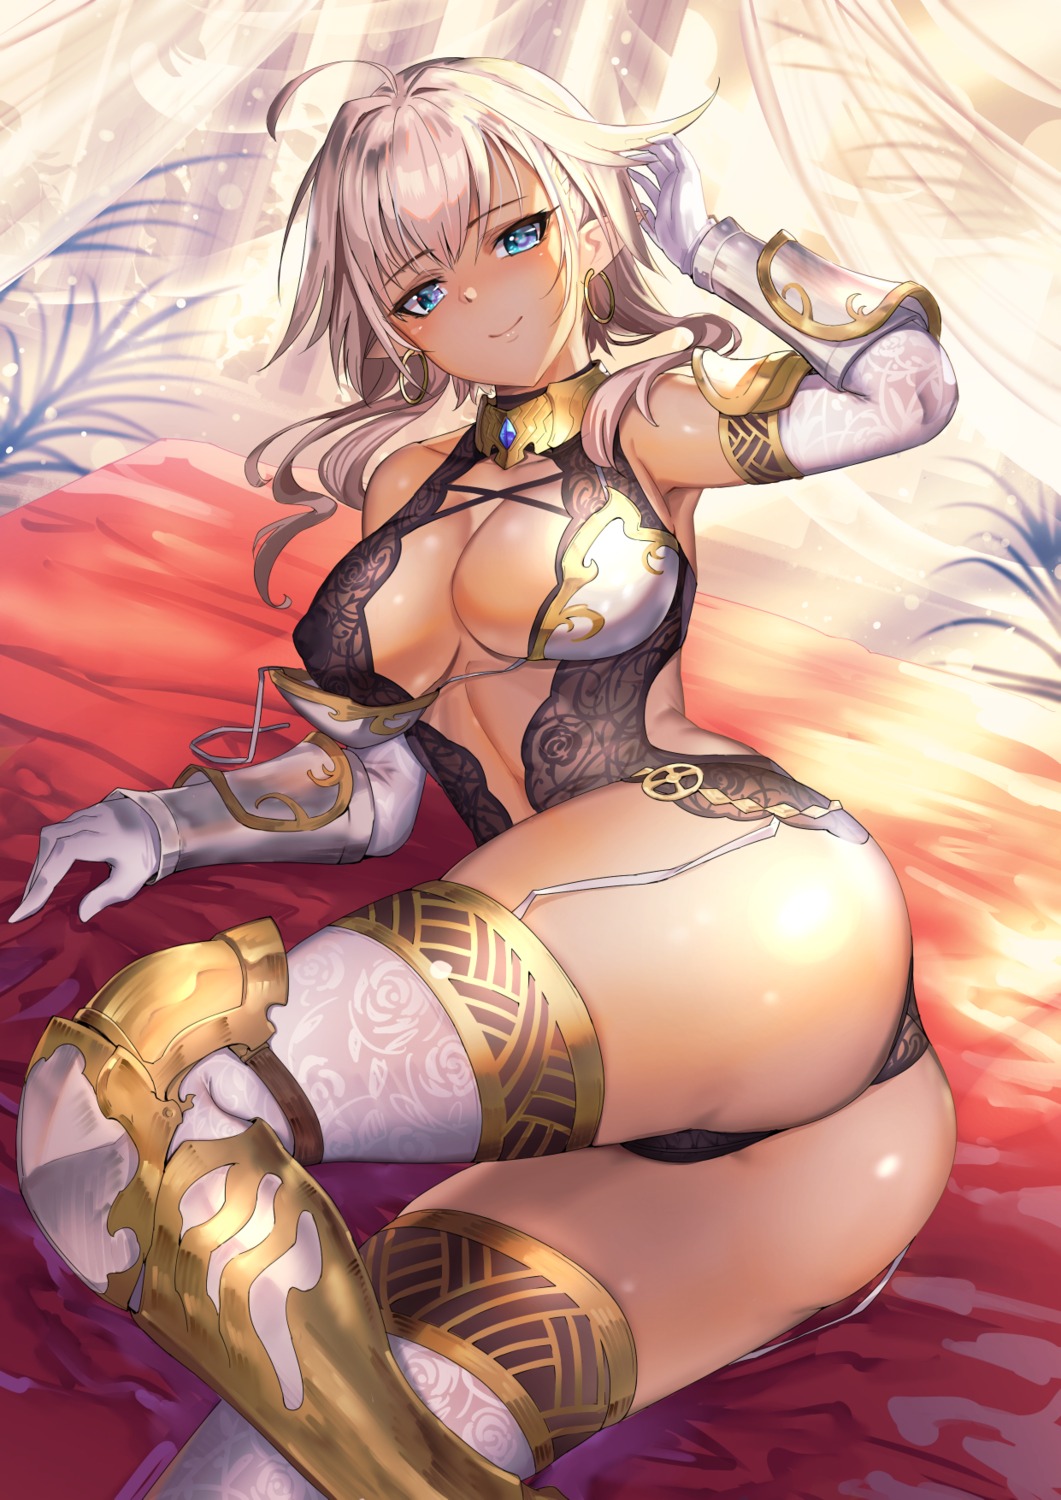 armor ass cleavage erect_nipples leotard lingerie matsumoto_mitsuaki no_bra pointy_ears see_through stockings thighhighs